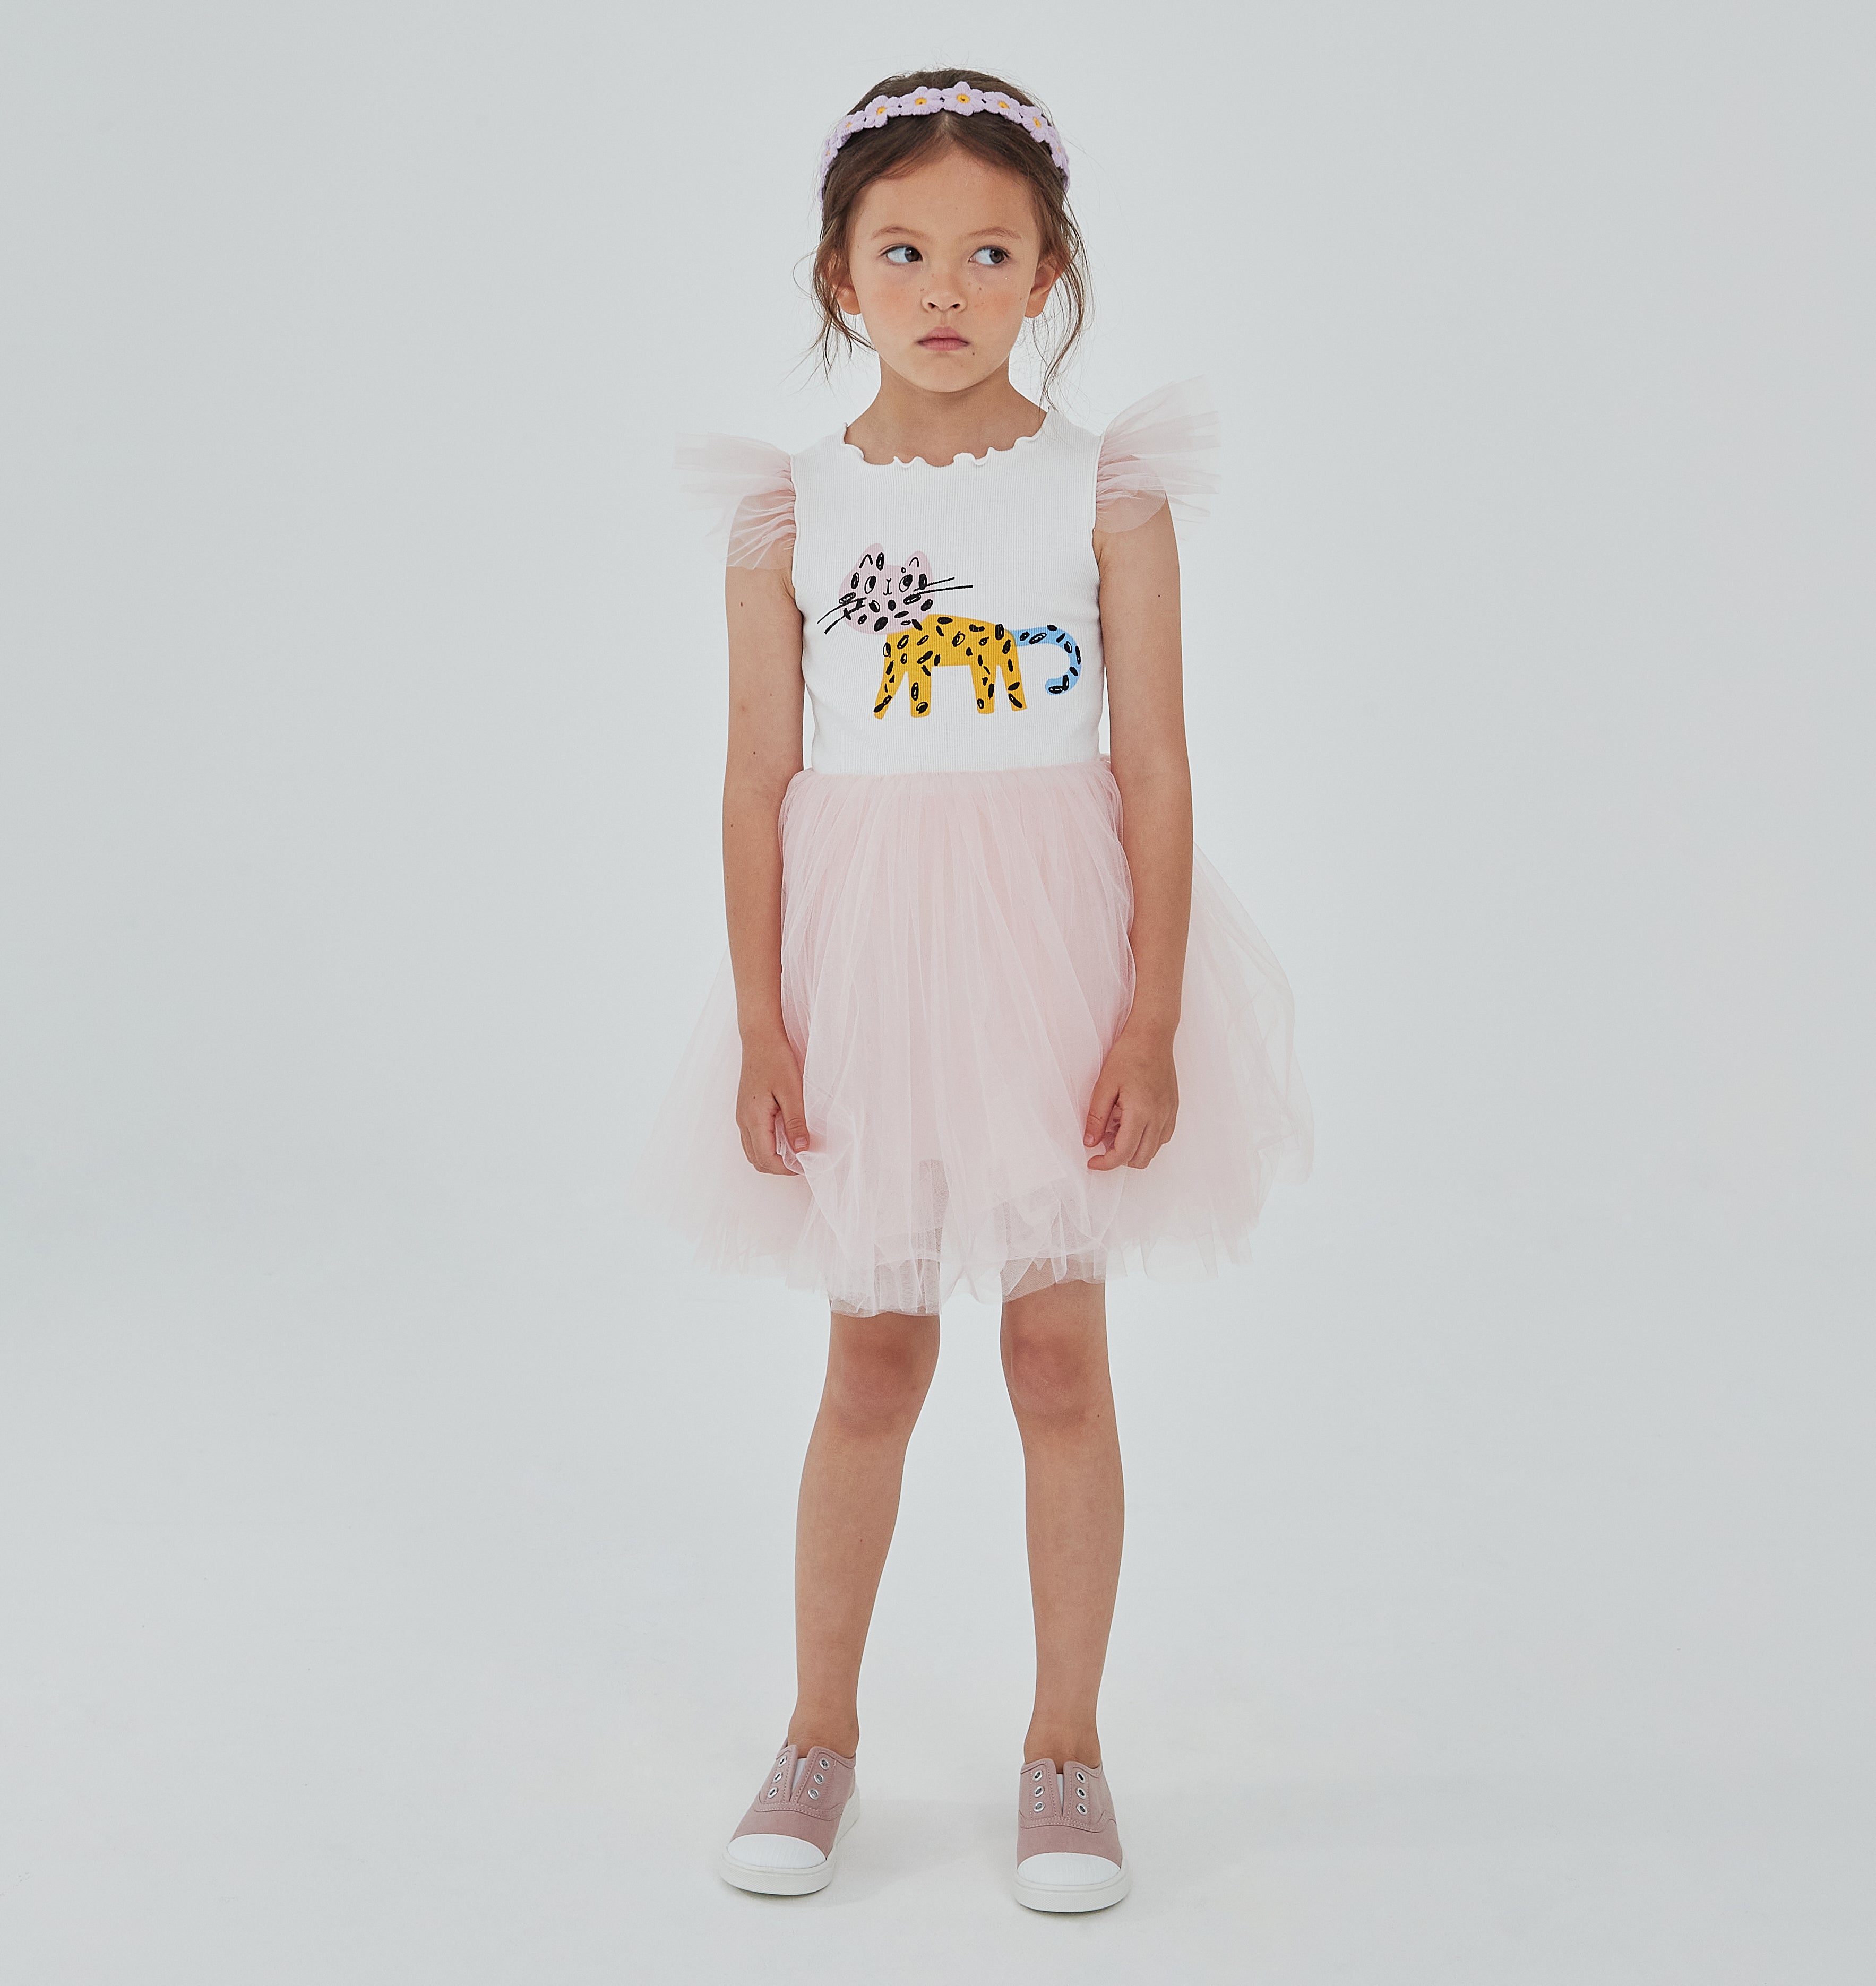 pink and white tutu dress with abstract multicolor cat print on the top front 